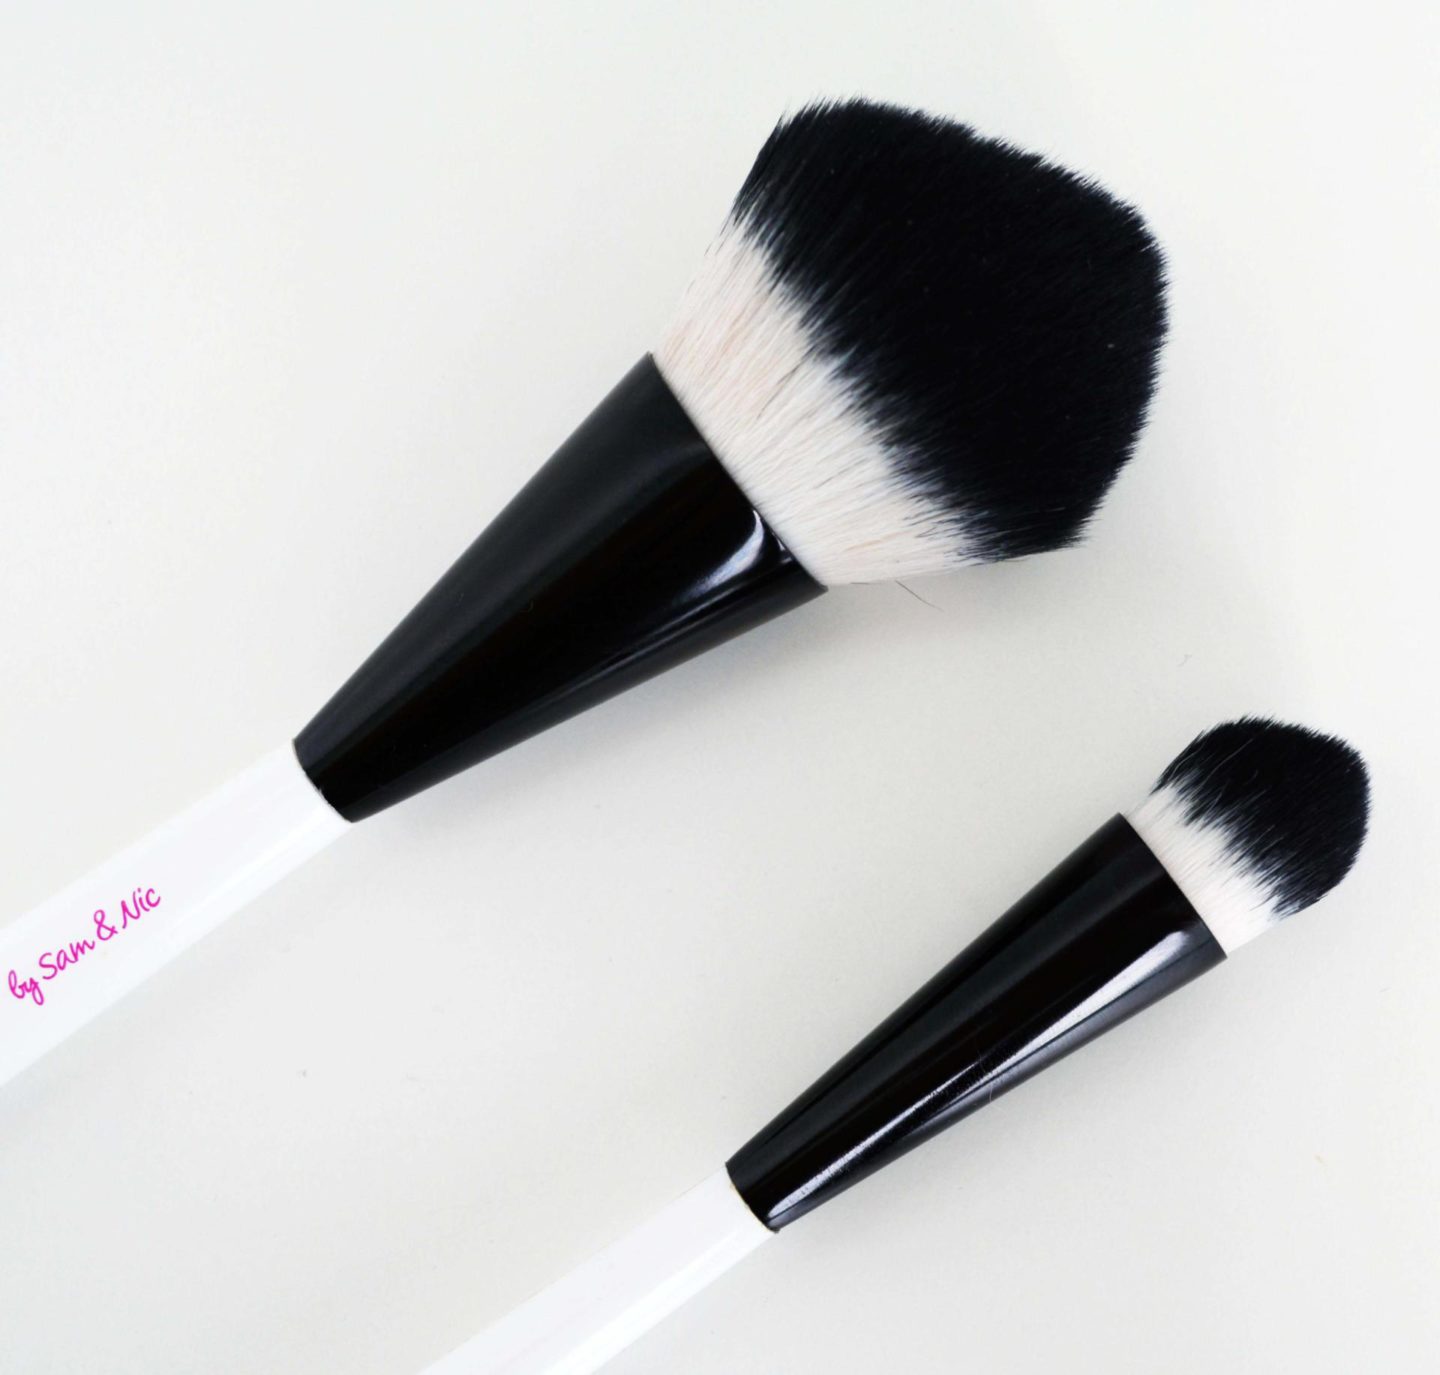 Real Techniques MultiTech Brushes 